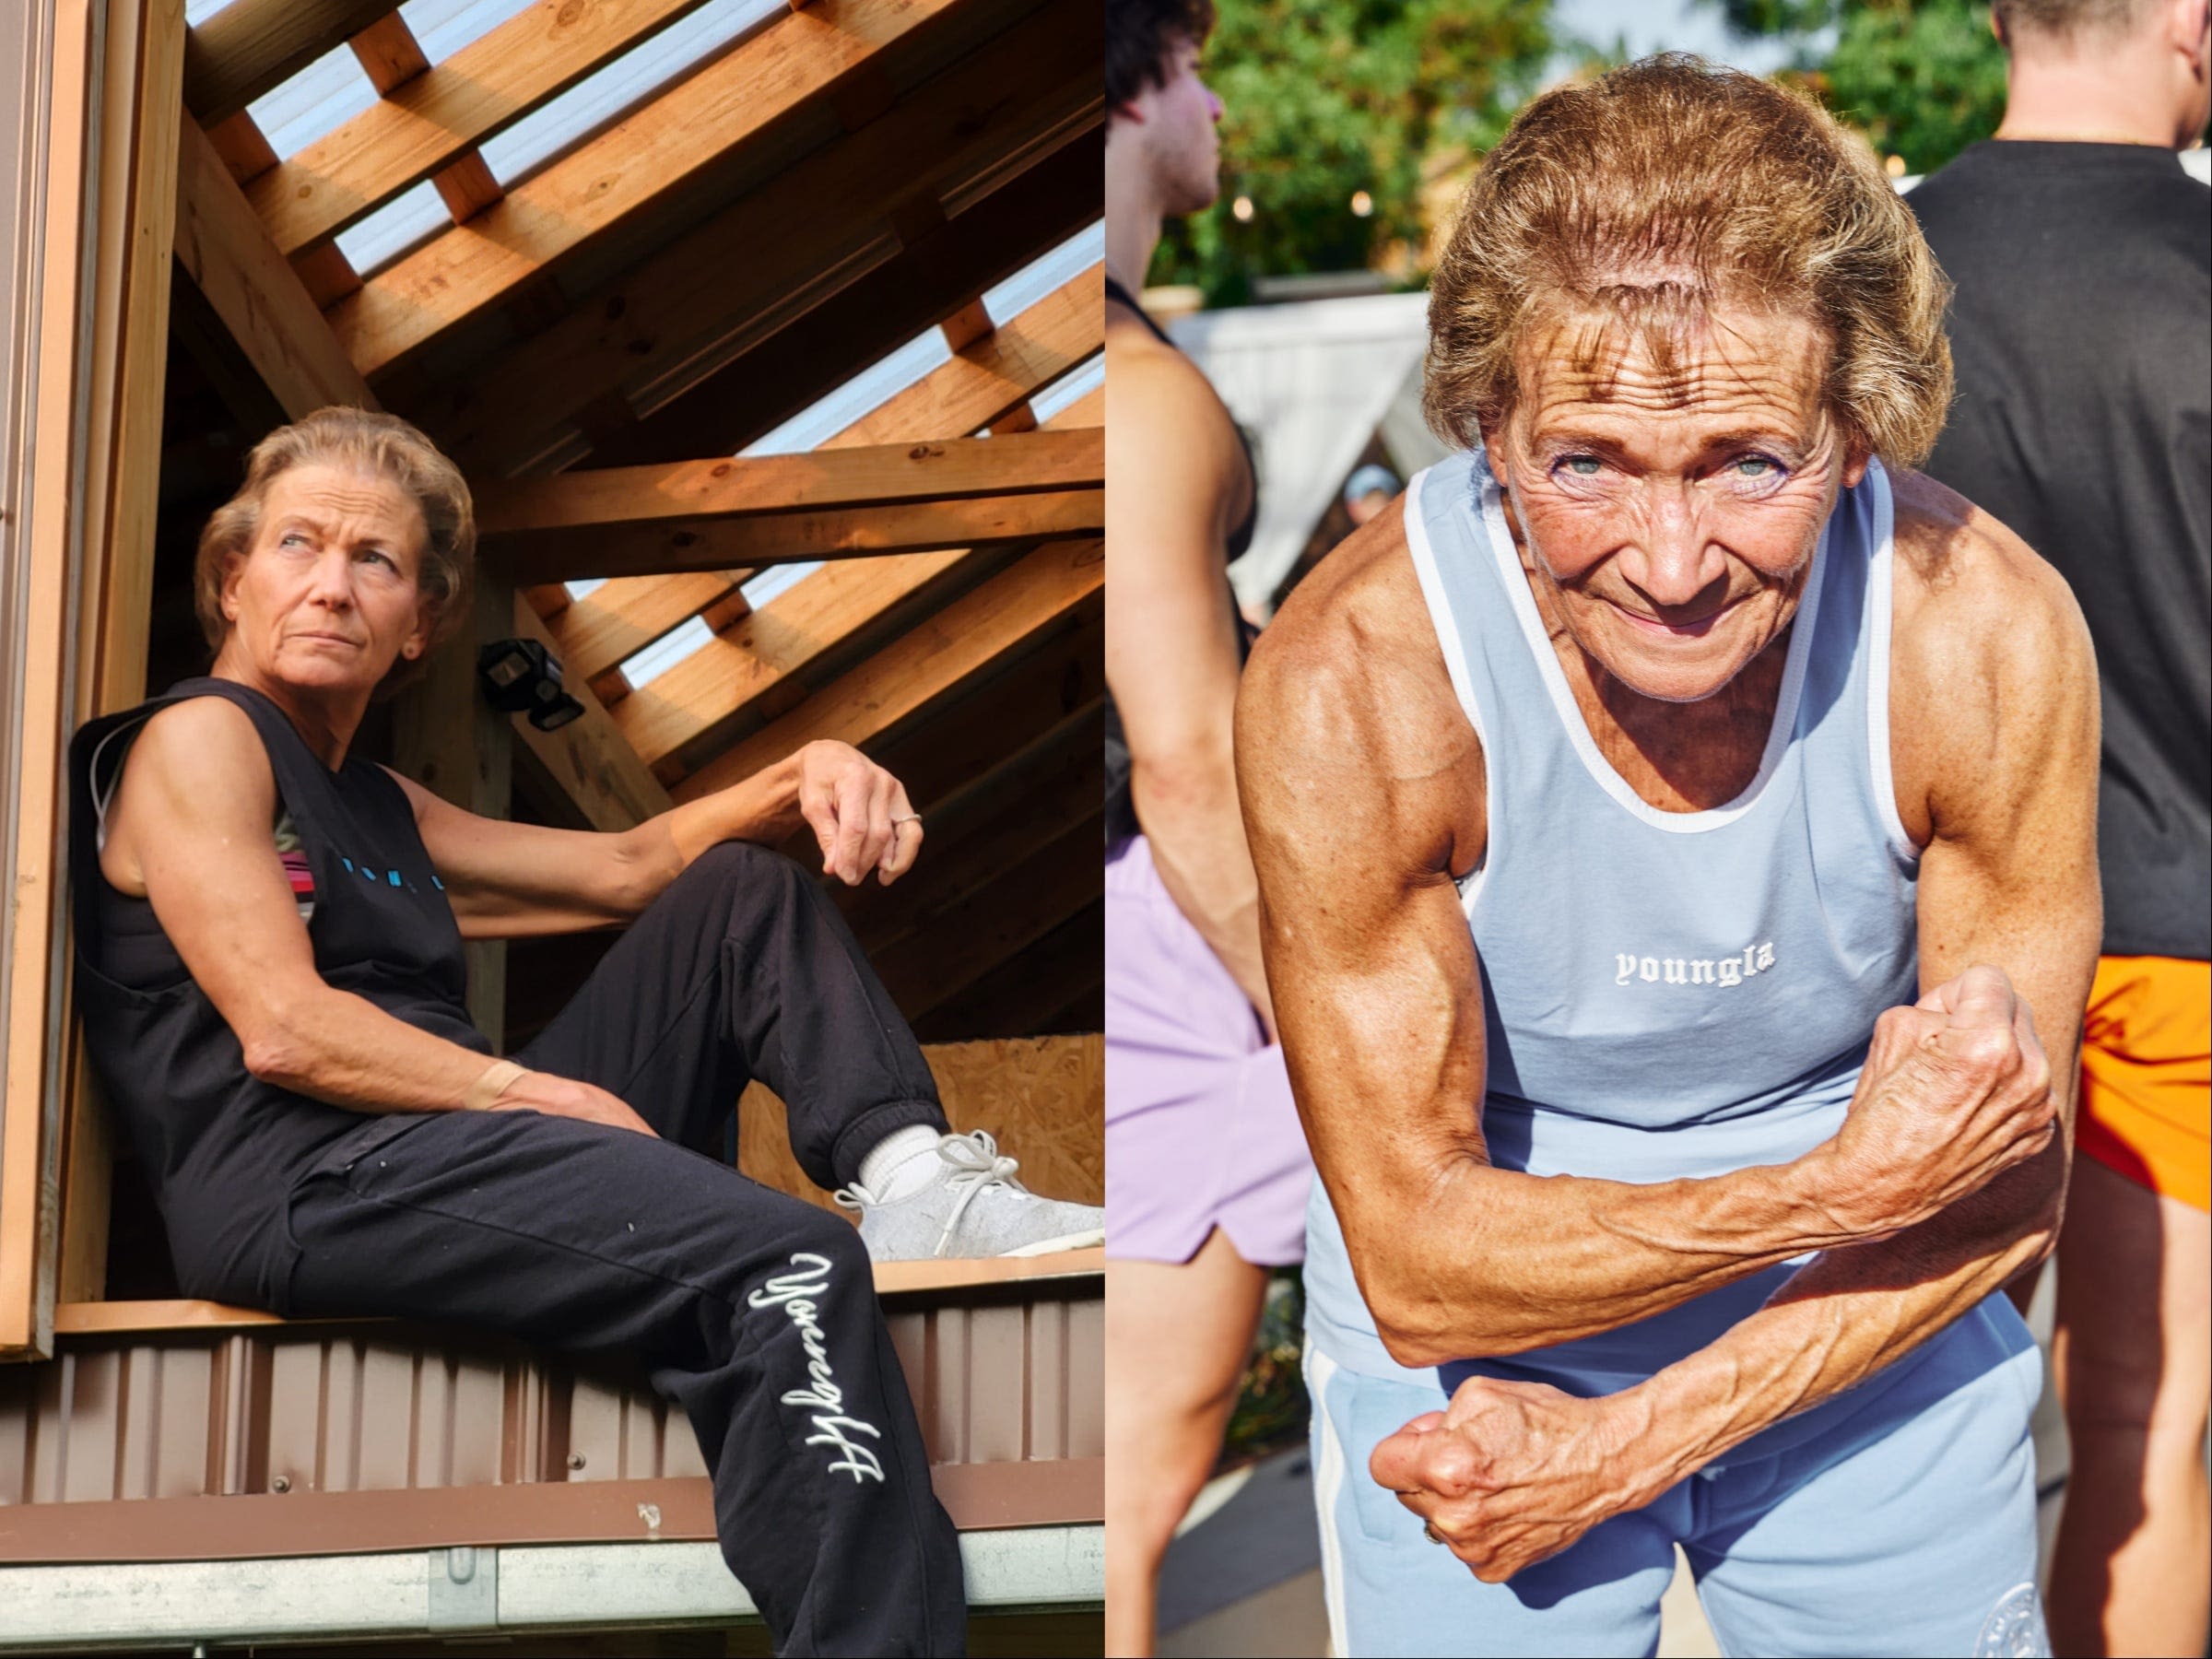 A 67-year-old bodybuilder who started exercising in her 50s shares 4 things she's learned about getting fit at any age